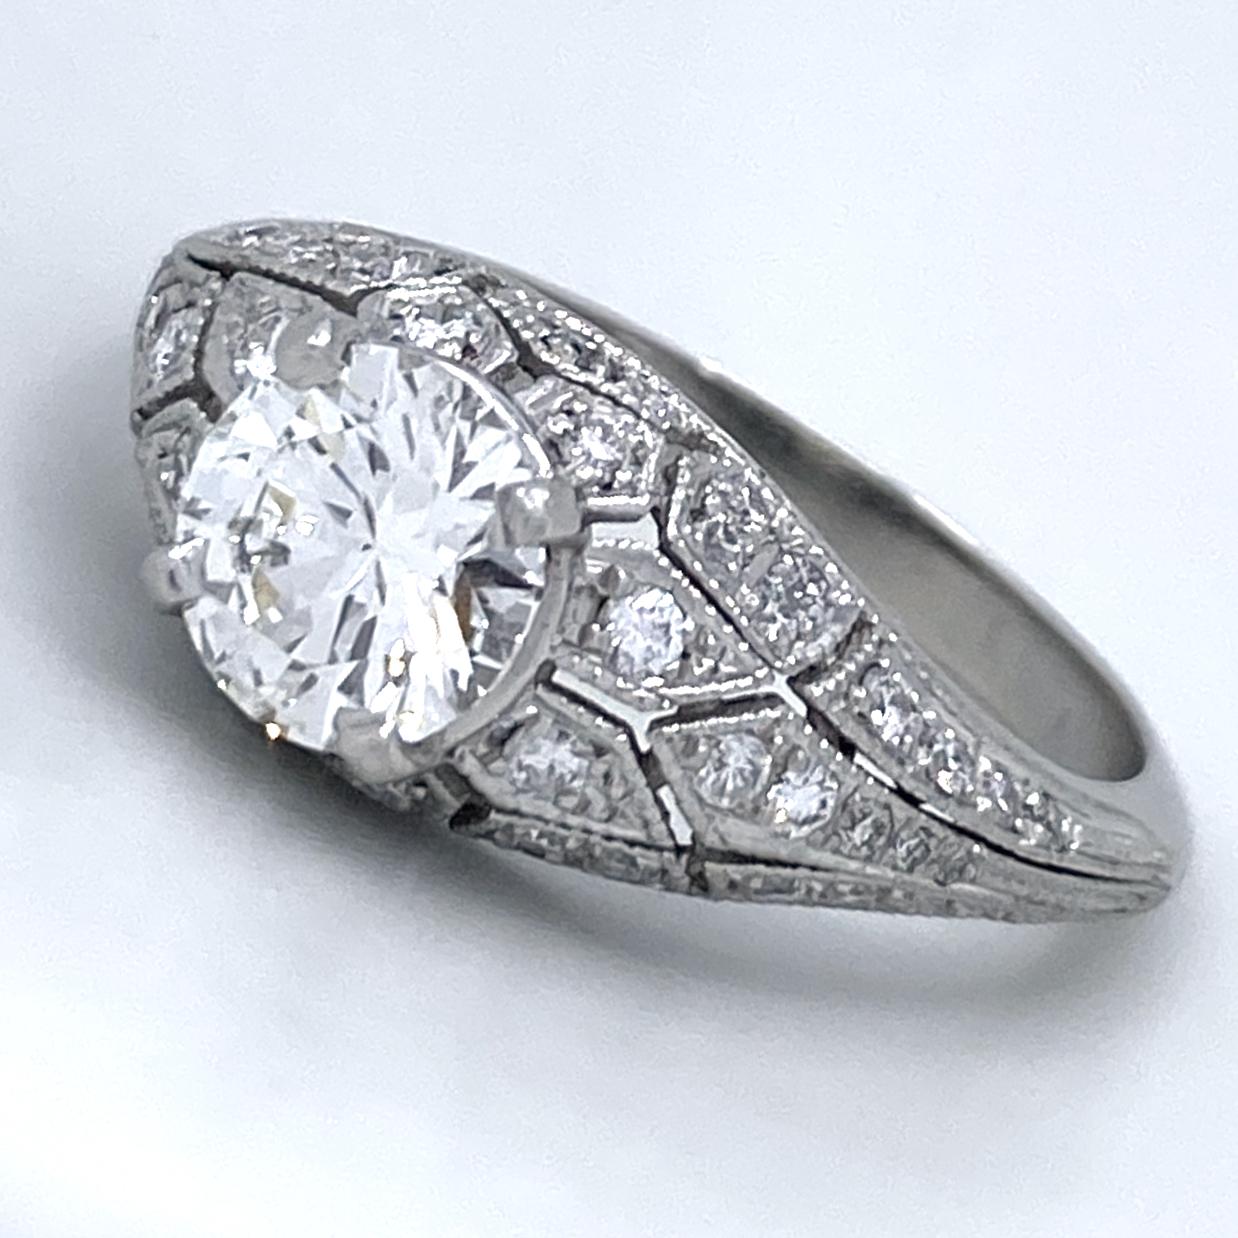 Contemporary GIA Certified H/VS2 1.03 Carat Diamond in Bombe Edwardian-Style Platinum Ring For Sale